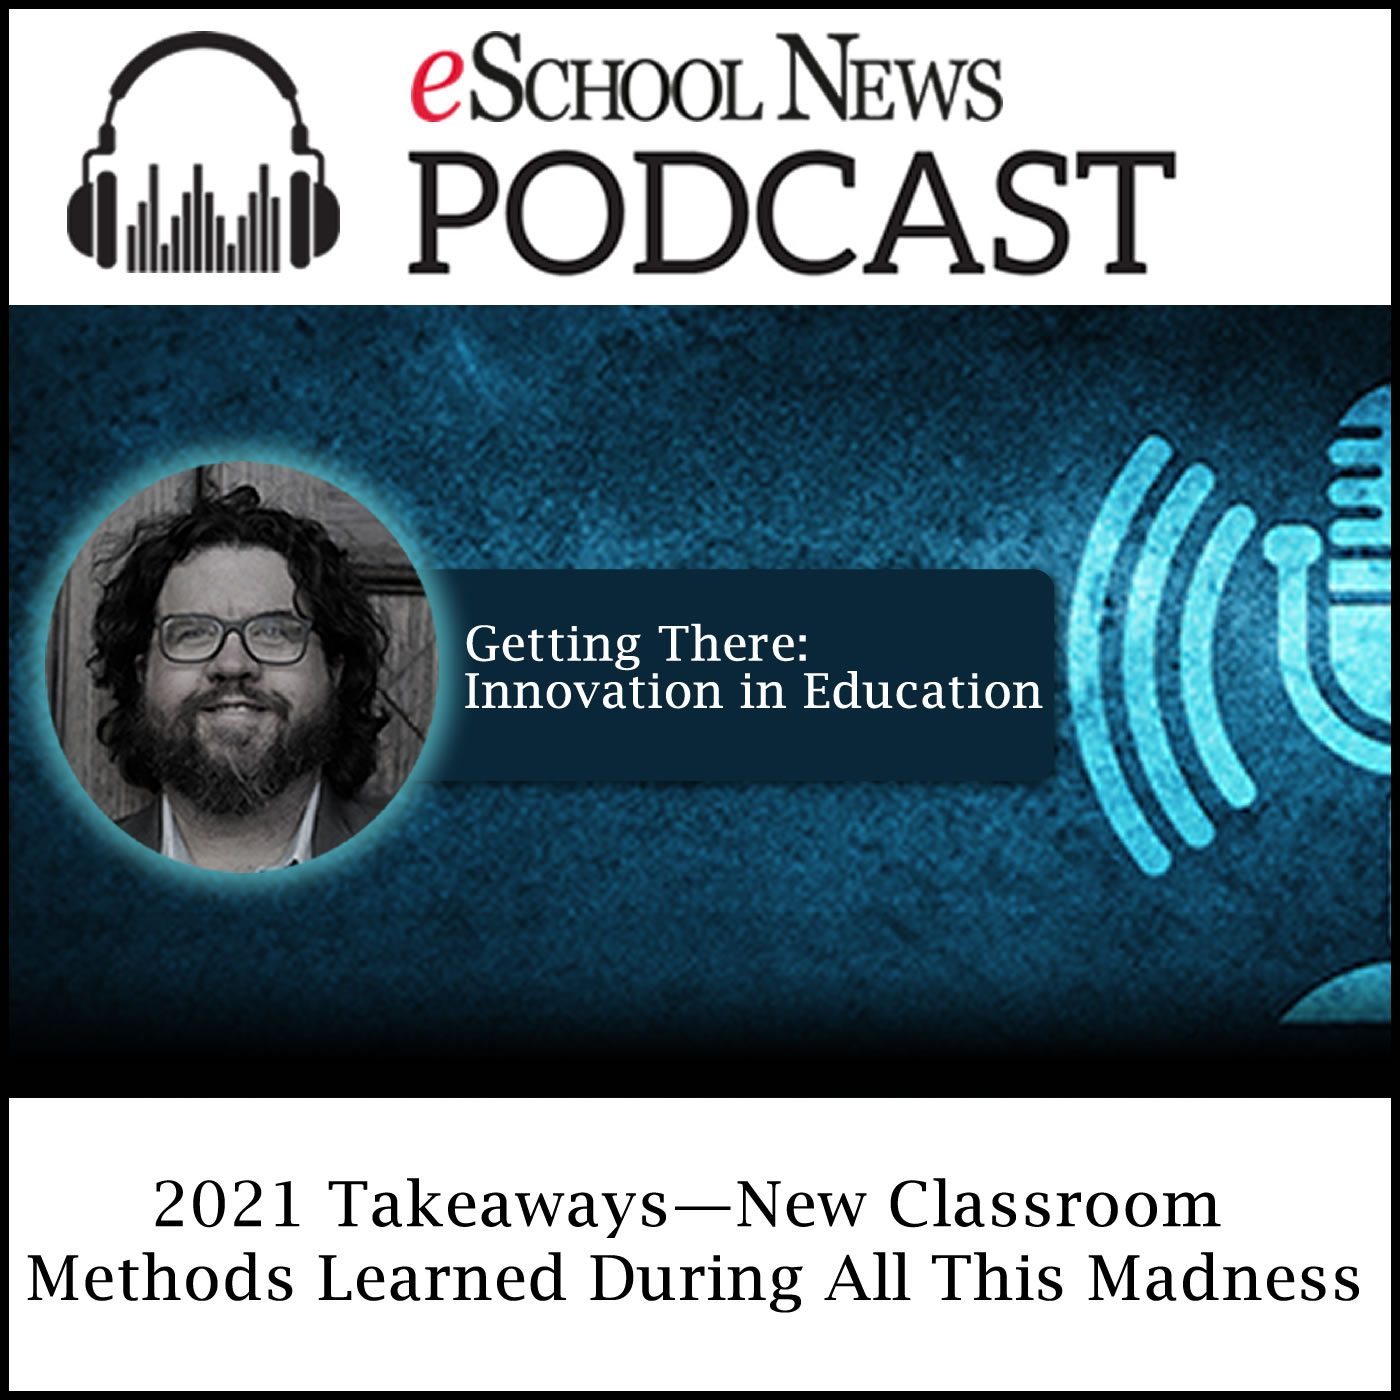 2021 Takeaways—New Classroom Methods Learned During All This Madness